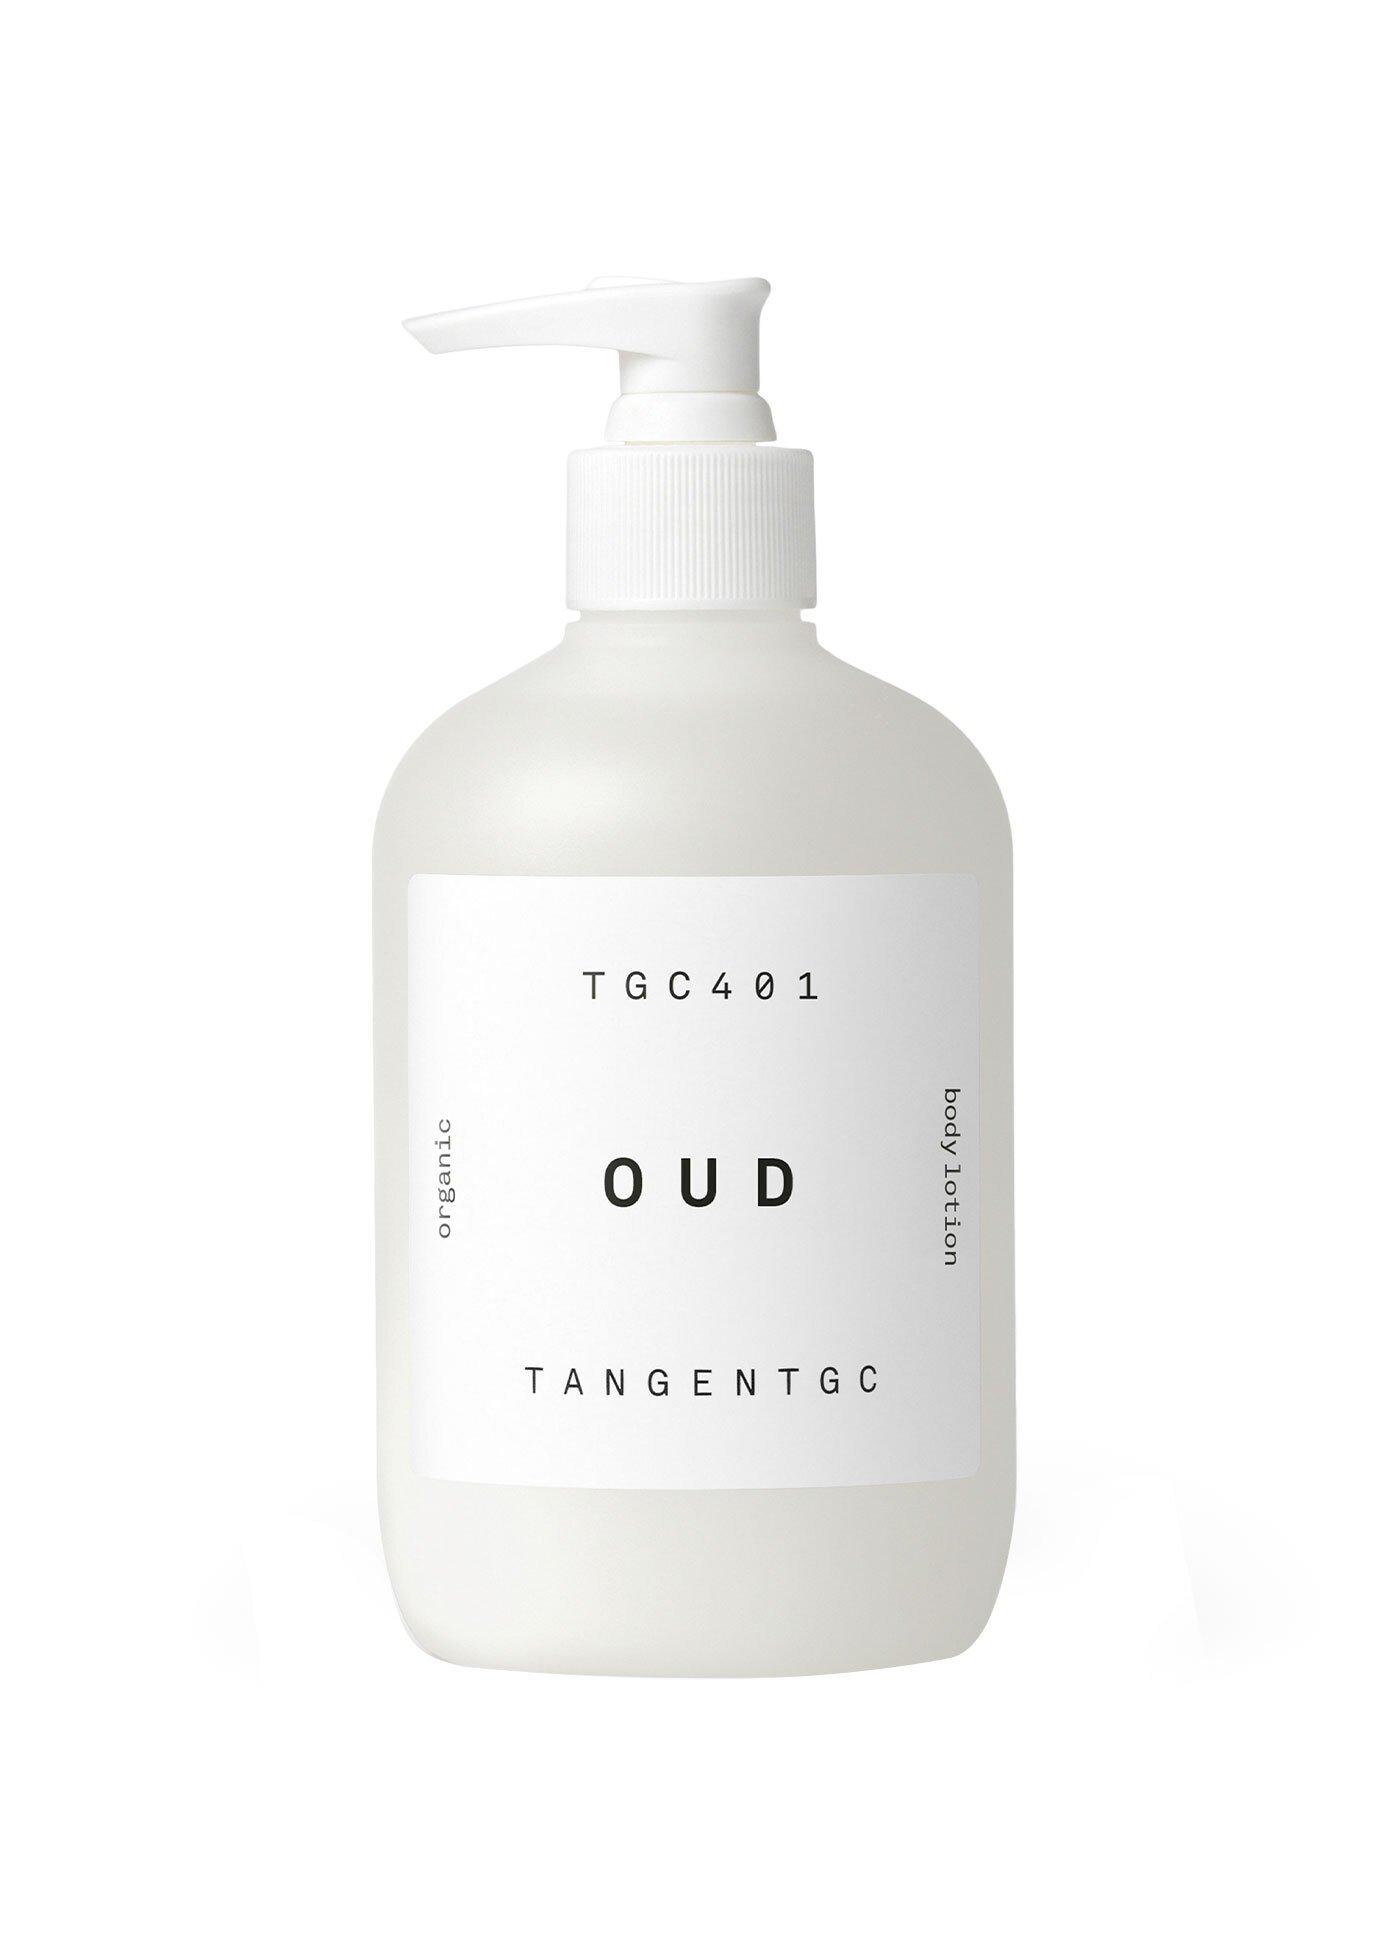 Tangent GC  Body Lotion oud body lotion 